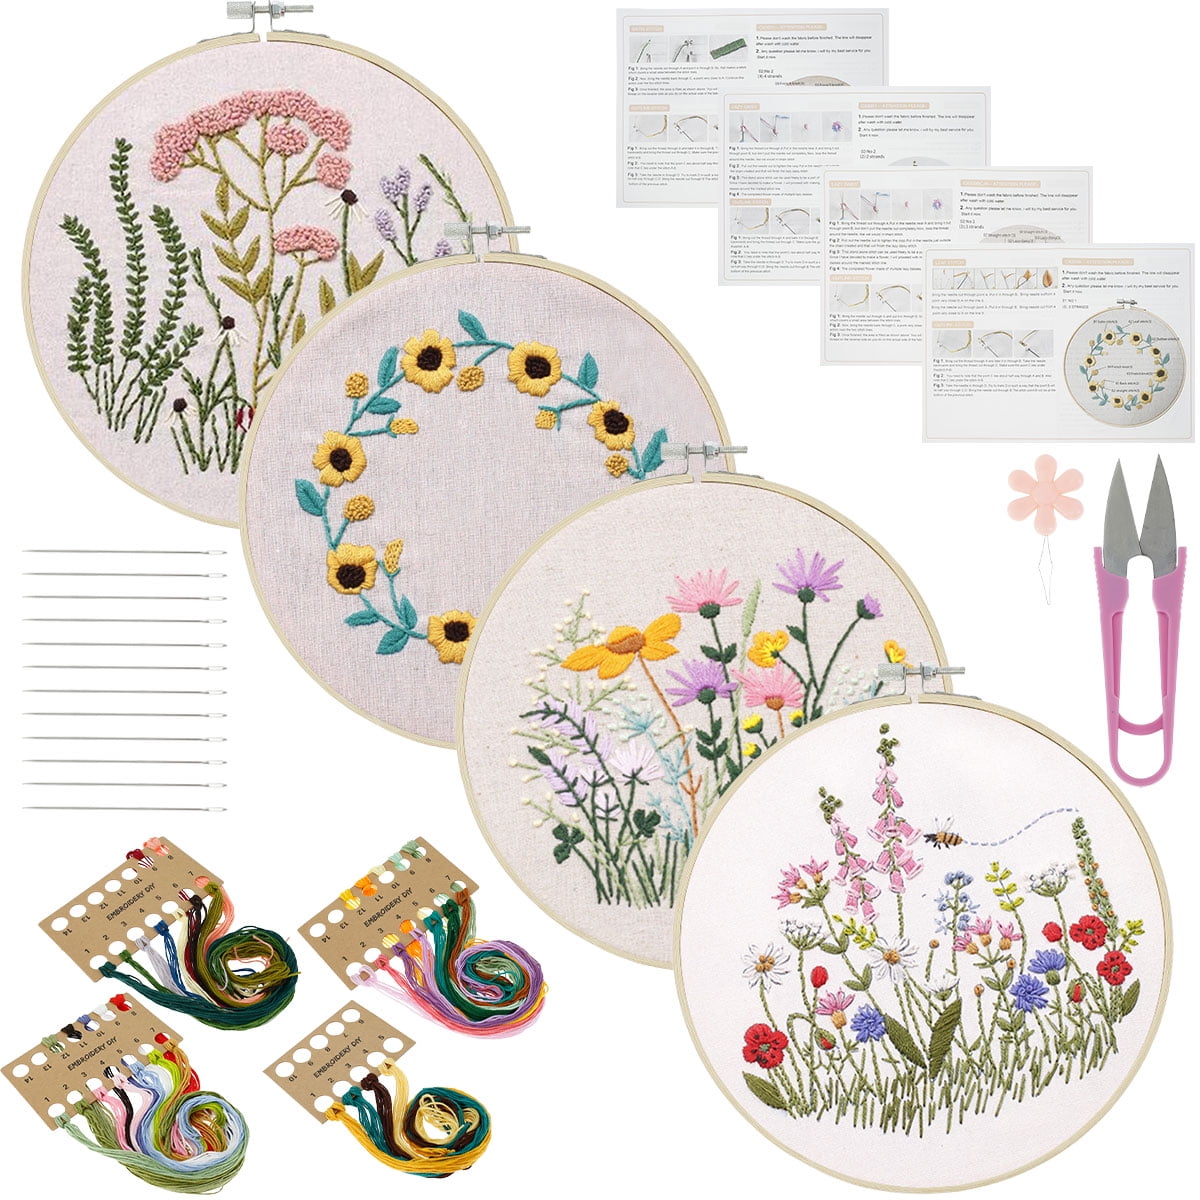 Jetcloudlive Embroidery Starter Kit Hand-Made Cross Stitch Kit with Pattern and Instructions Full Range of Embroidery Kits Embroidery Hoops DIY